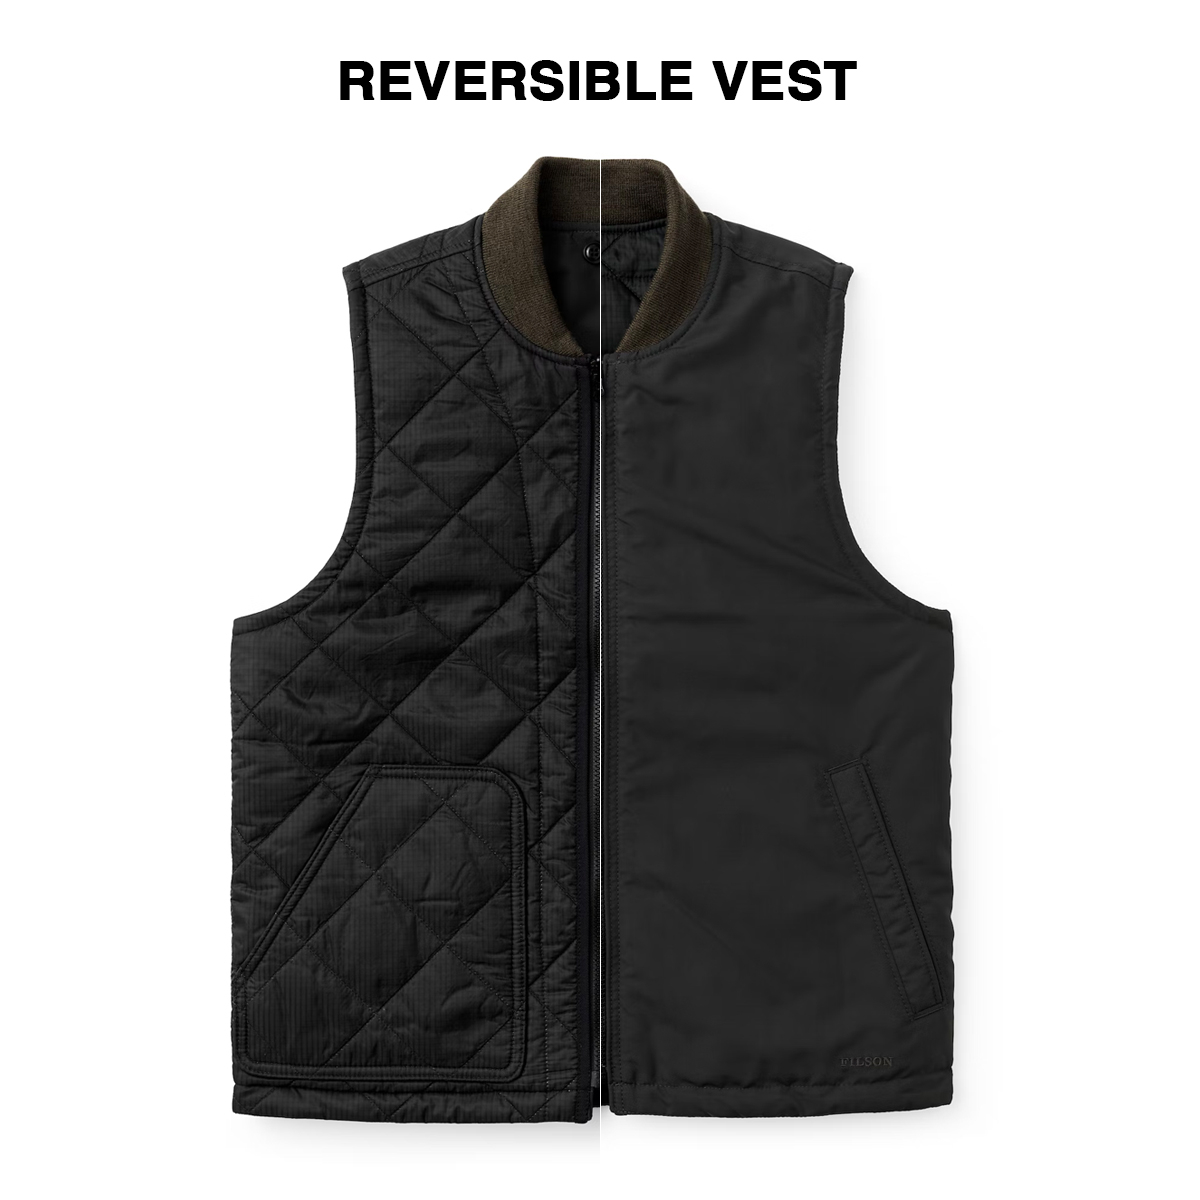 Filson Eagle Plains Vest Liner Charcoal, for added versatility, it’s fully reversible, with hand pockets available no matter which side faces out